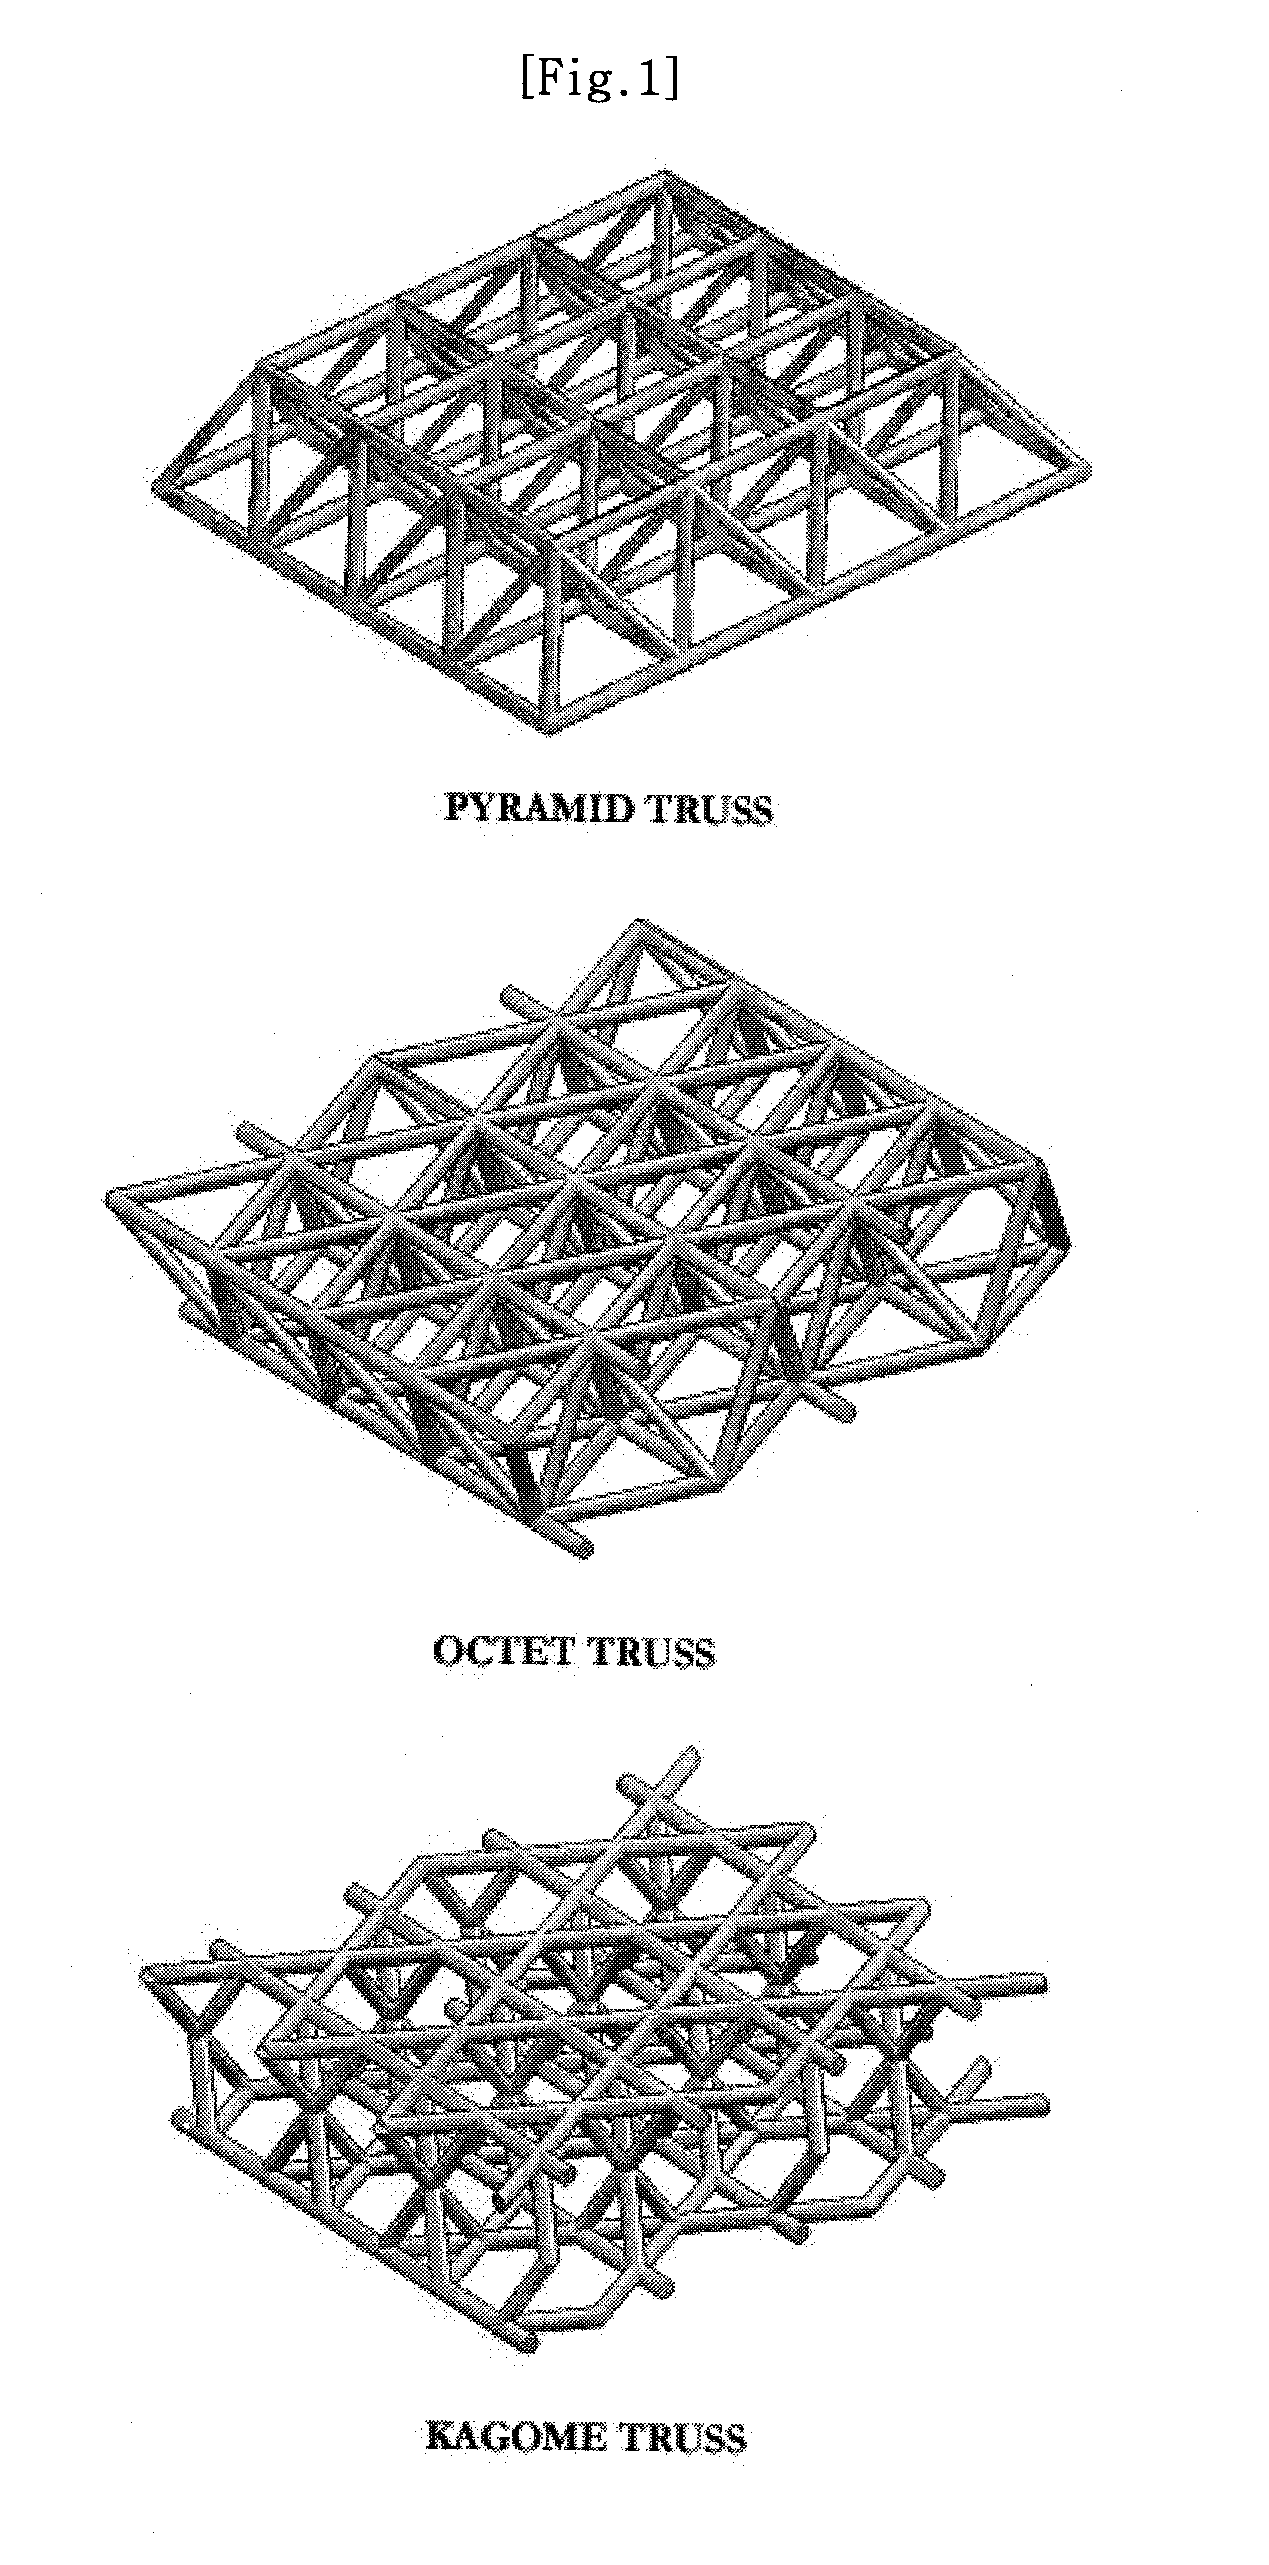 Truss type periodic cellular materials having internal cells, some of which are filled with solid materials